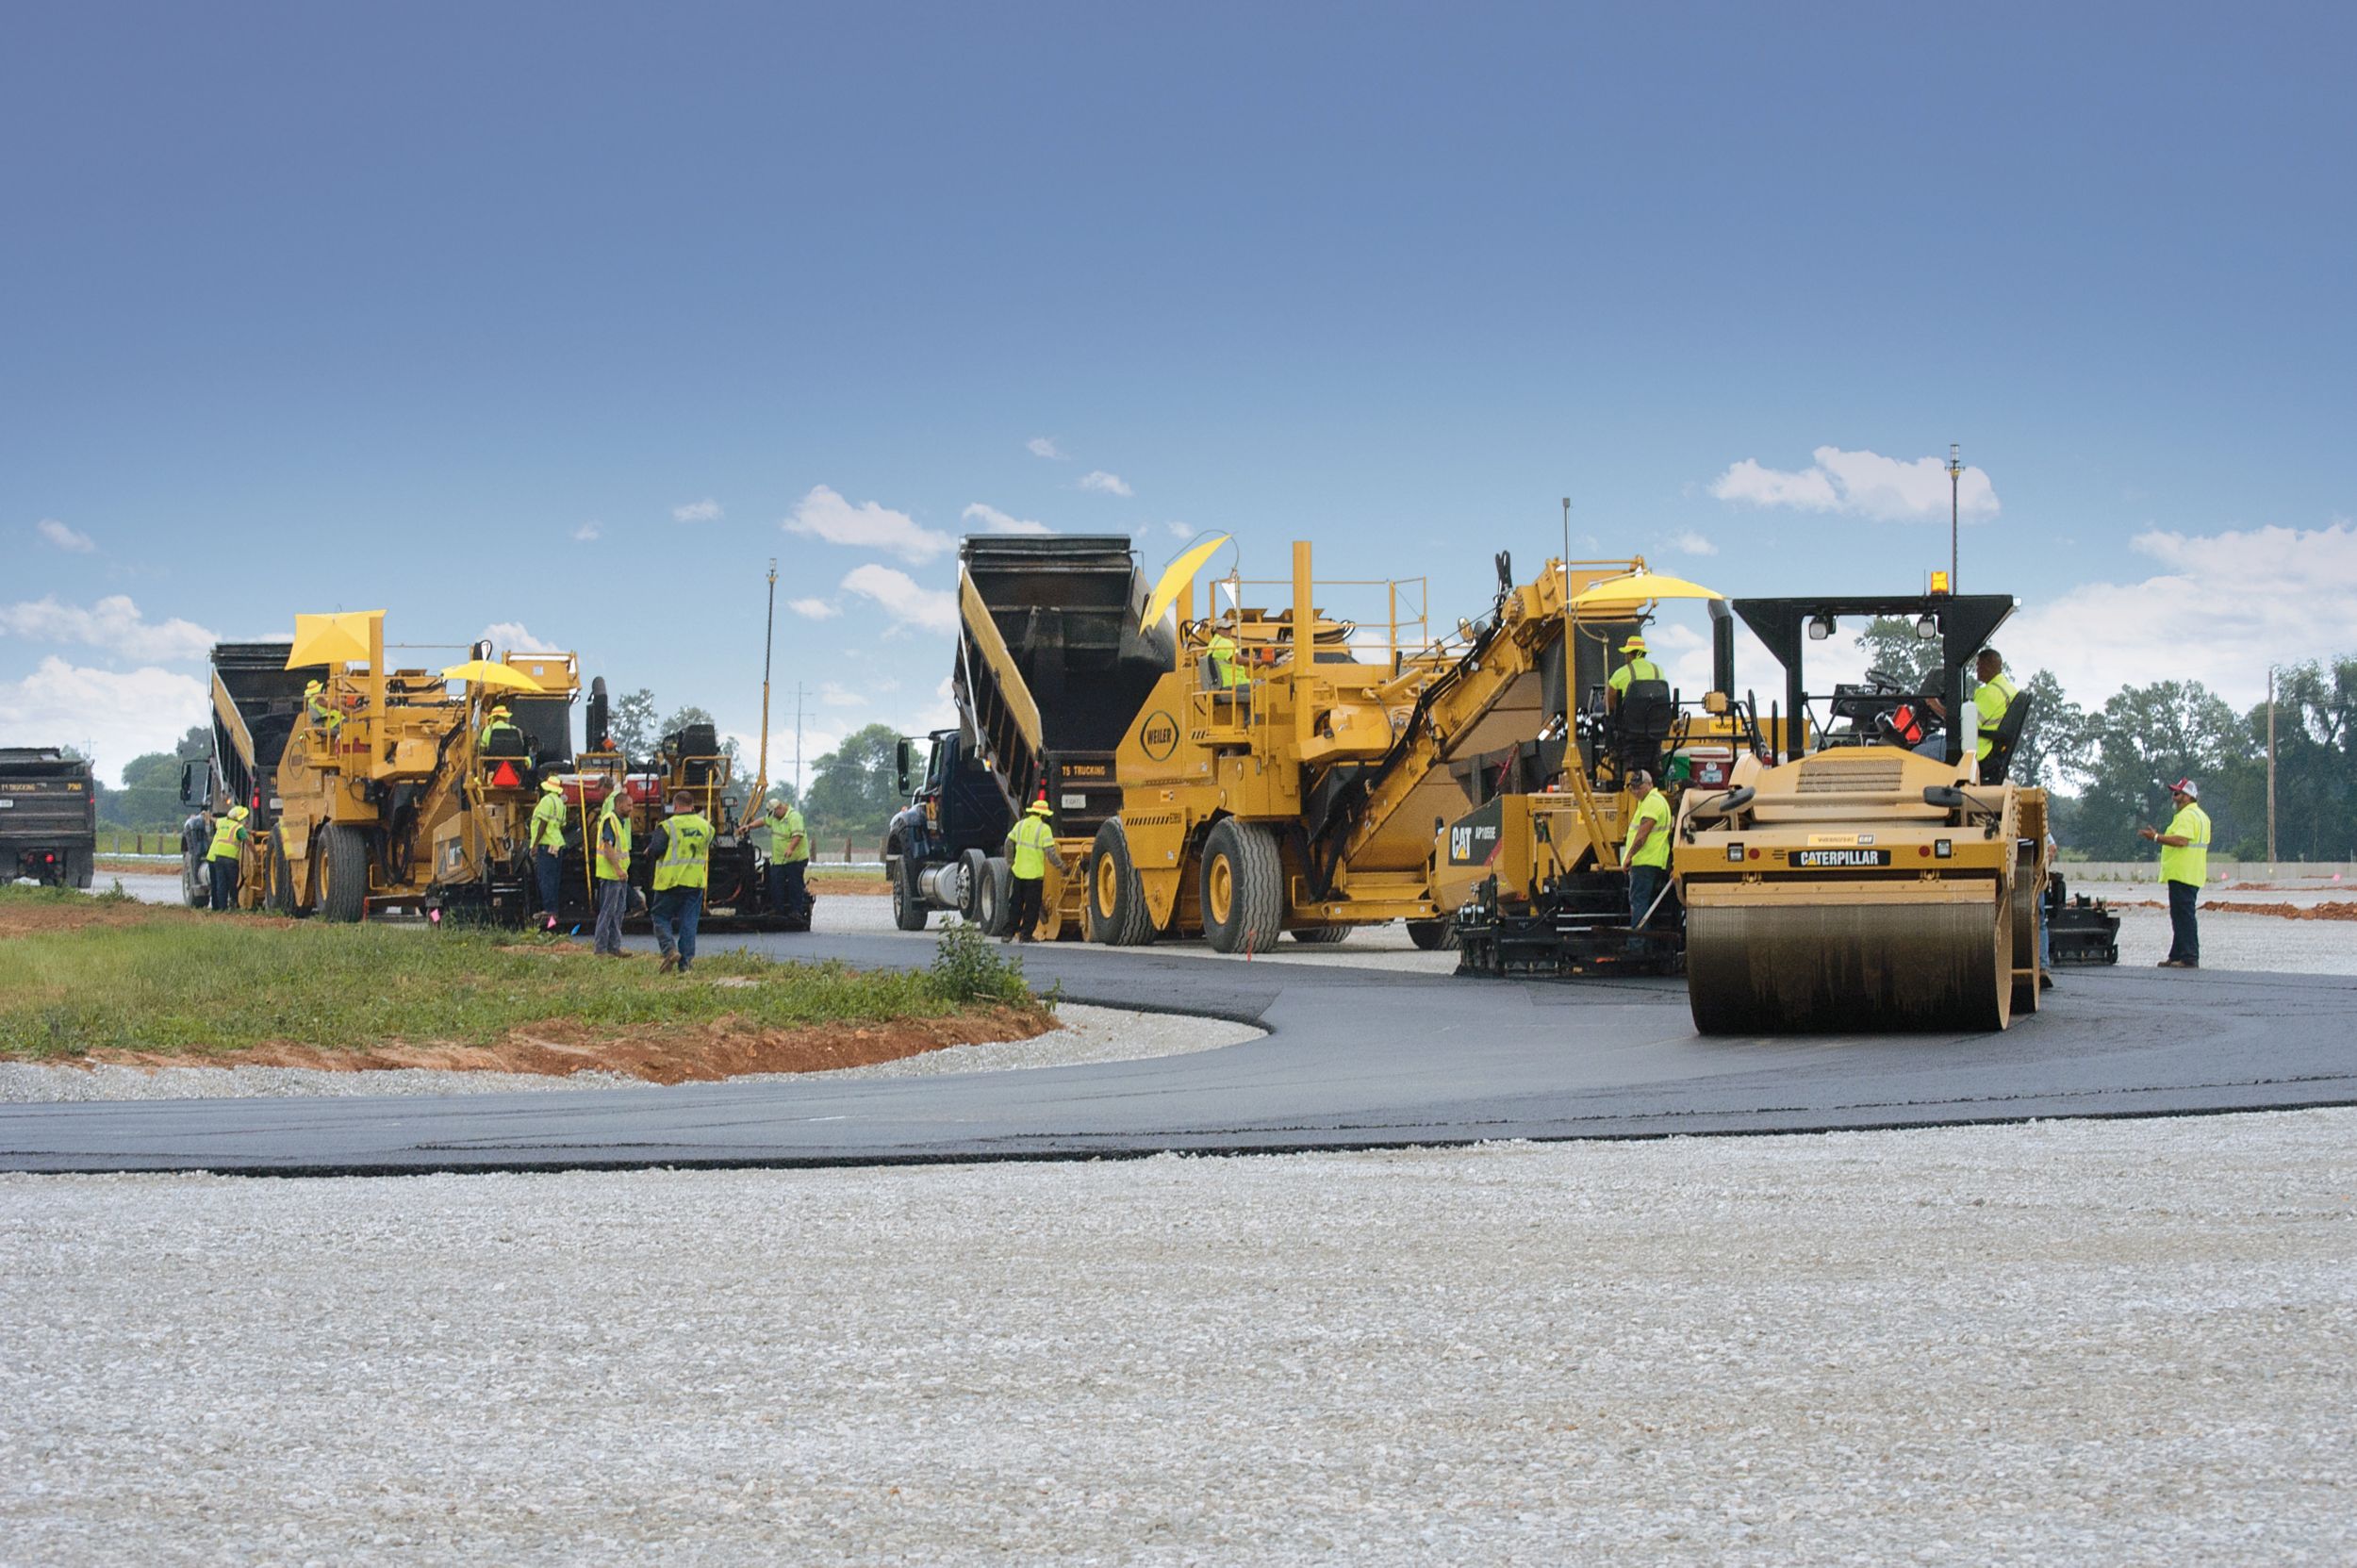 The paving train moved continuously to help achieve smoothness targets.